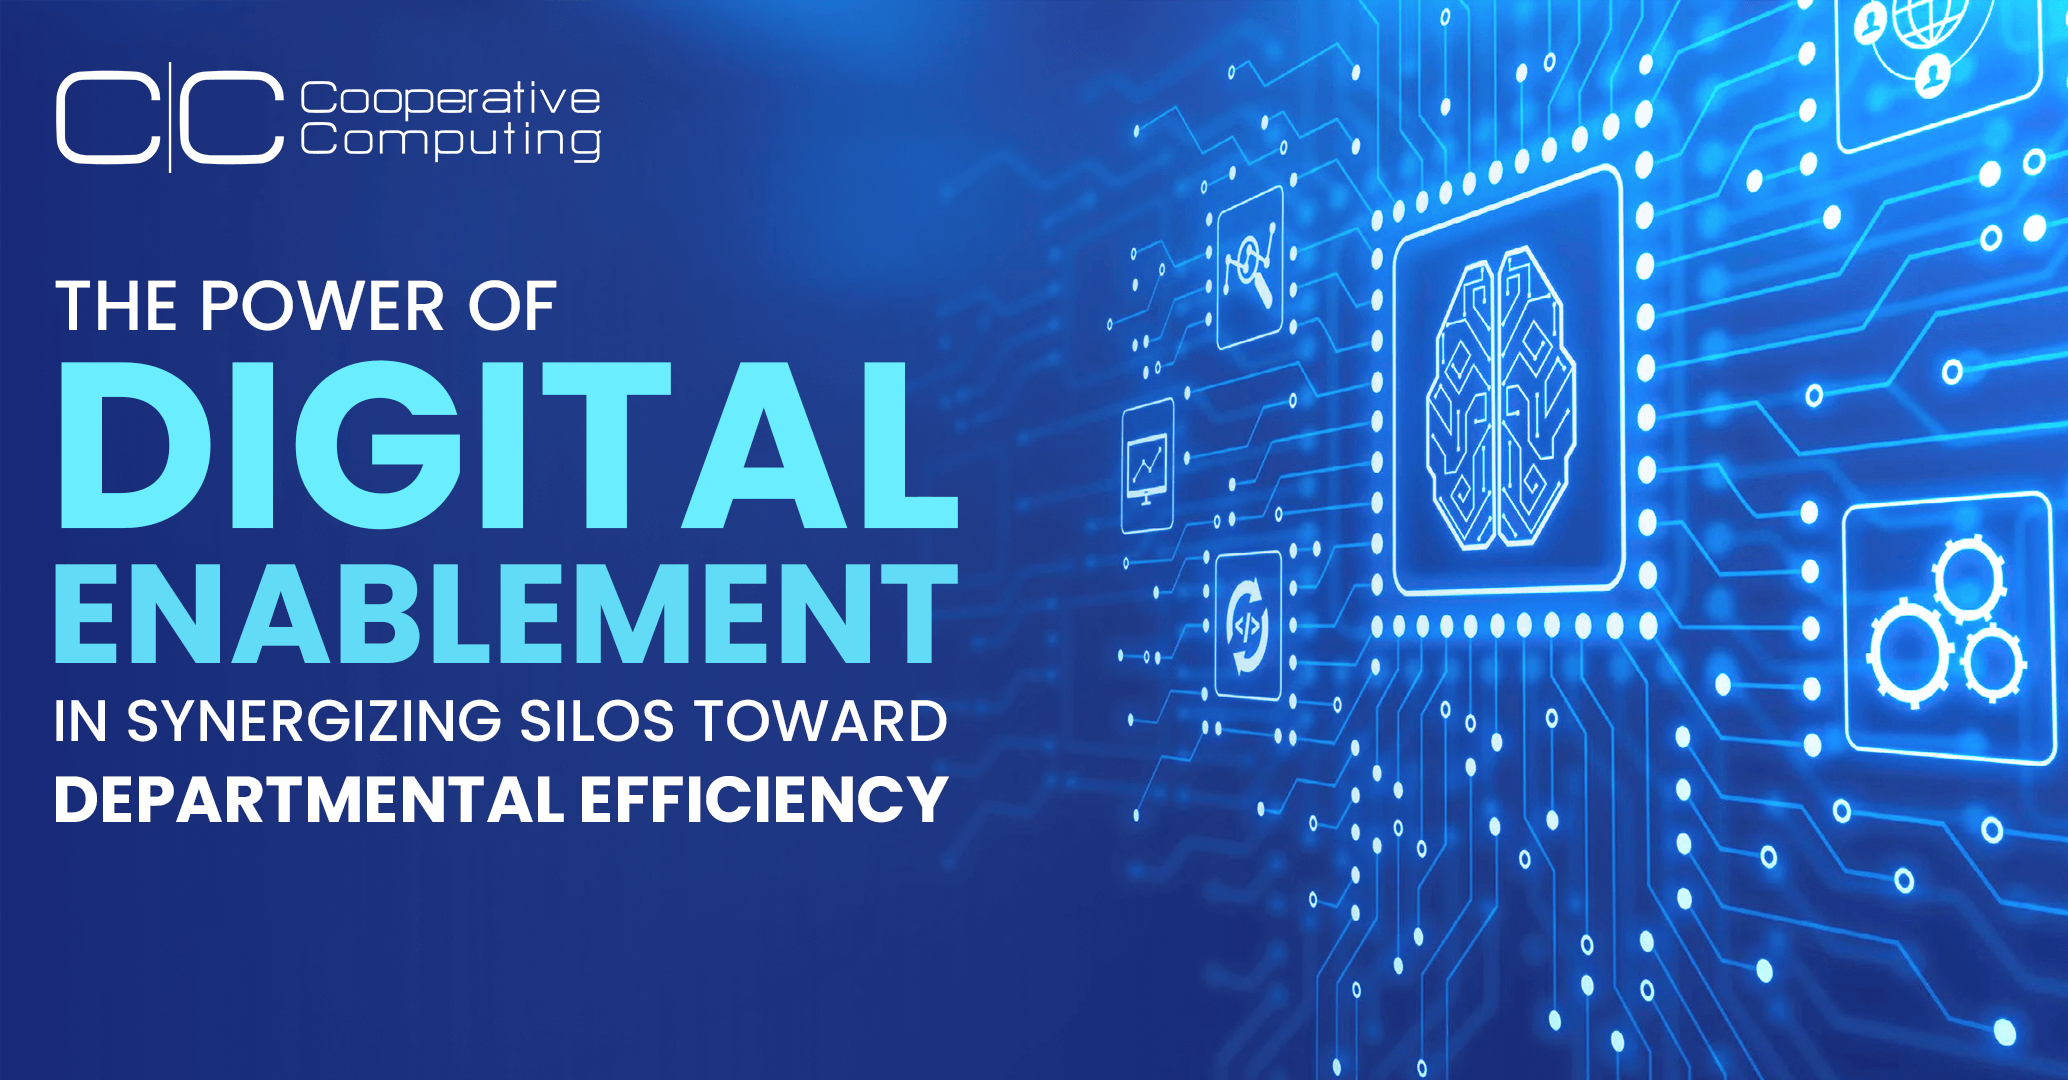 The Power of Digital Enablement in Synergizing Silos Toward Departmental Efficiency